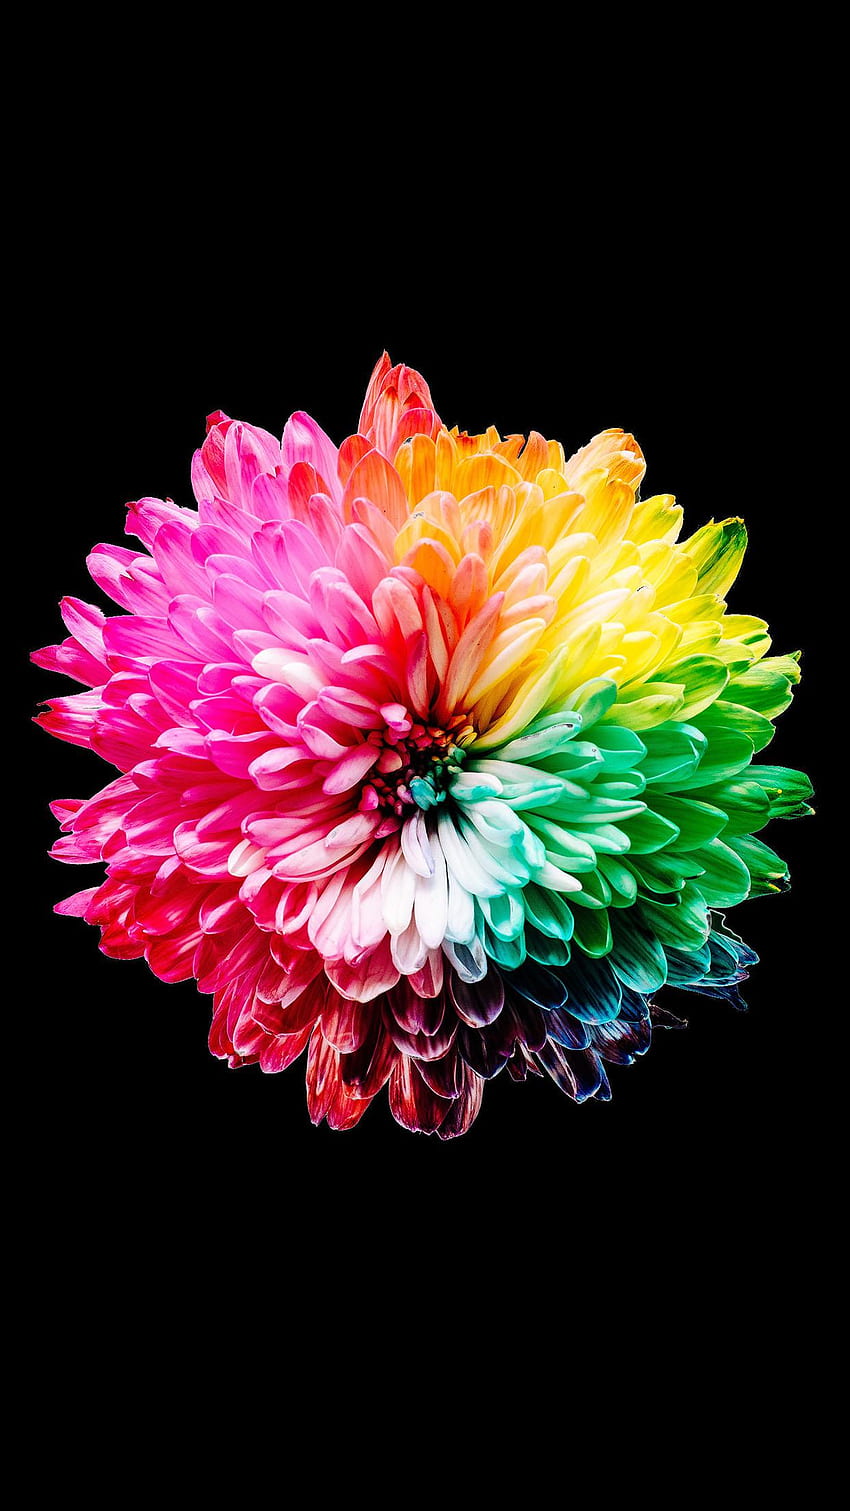 Amoled Background 017 - Colour Wheel From Nature -, AMOLED Flower HD phone wallpaper